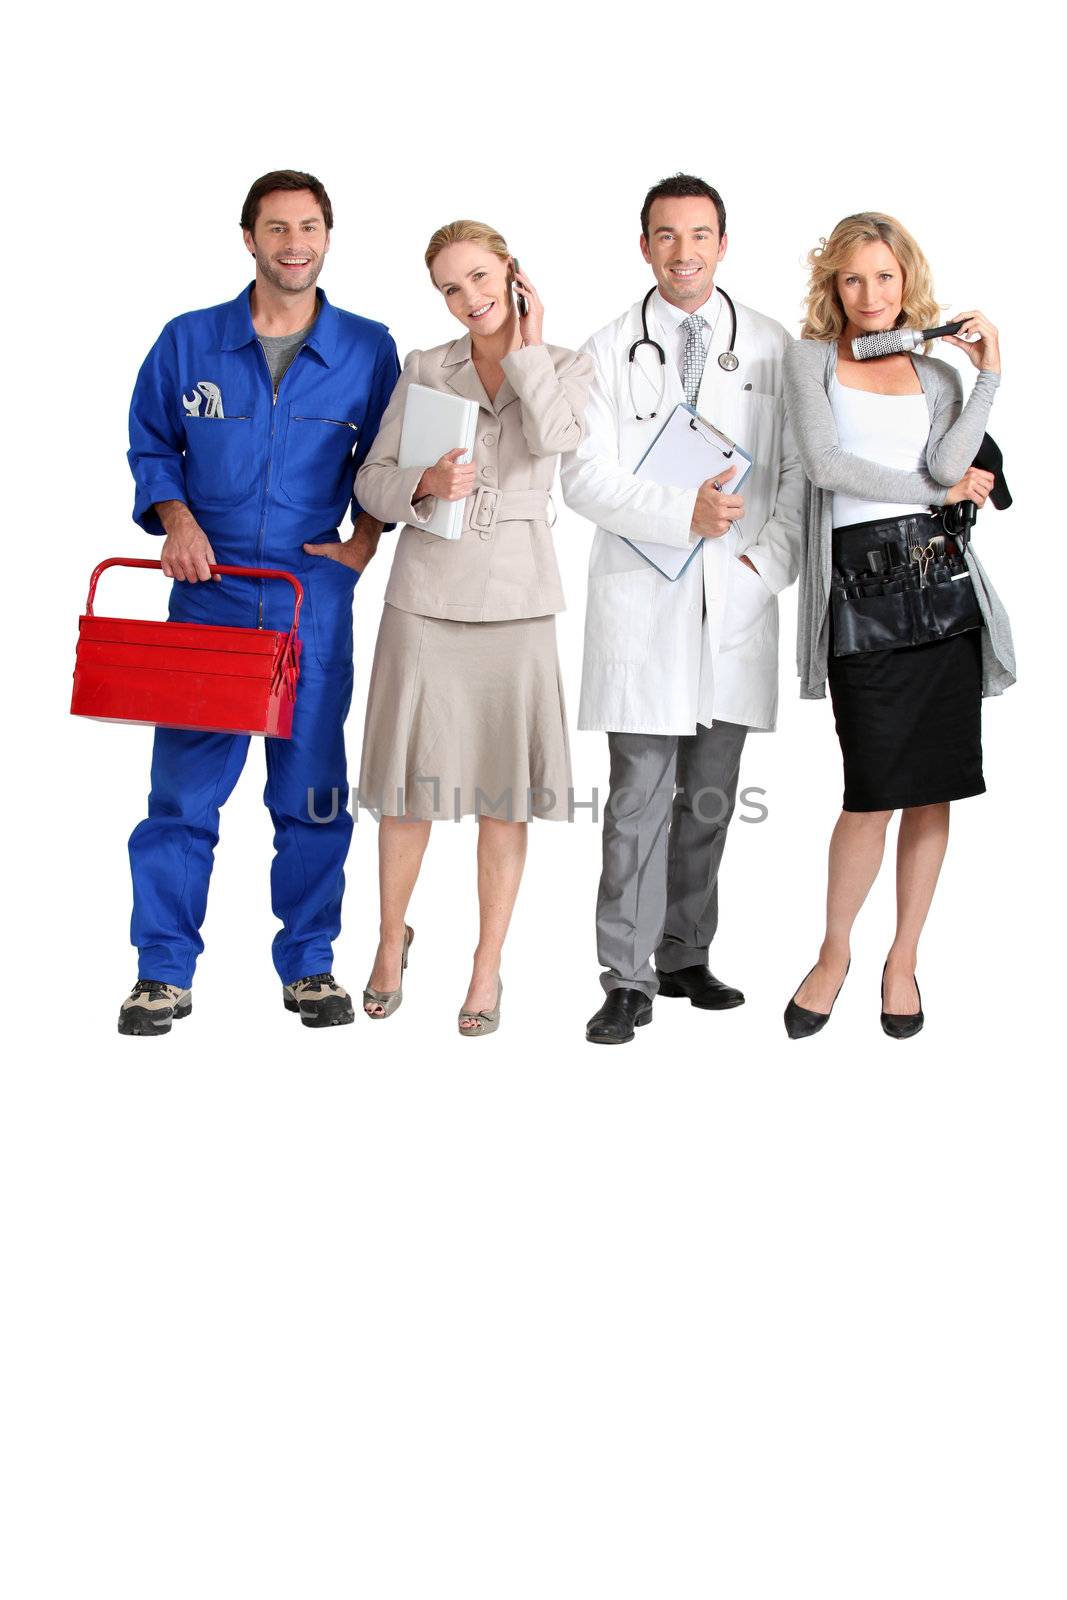 Mechanic, receptionist, doctor and hairdresser.